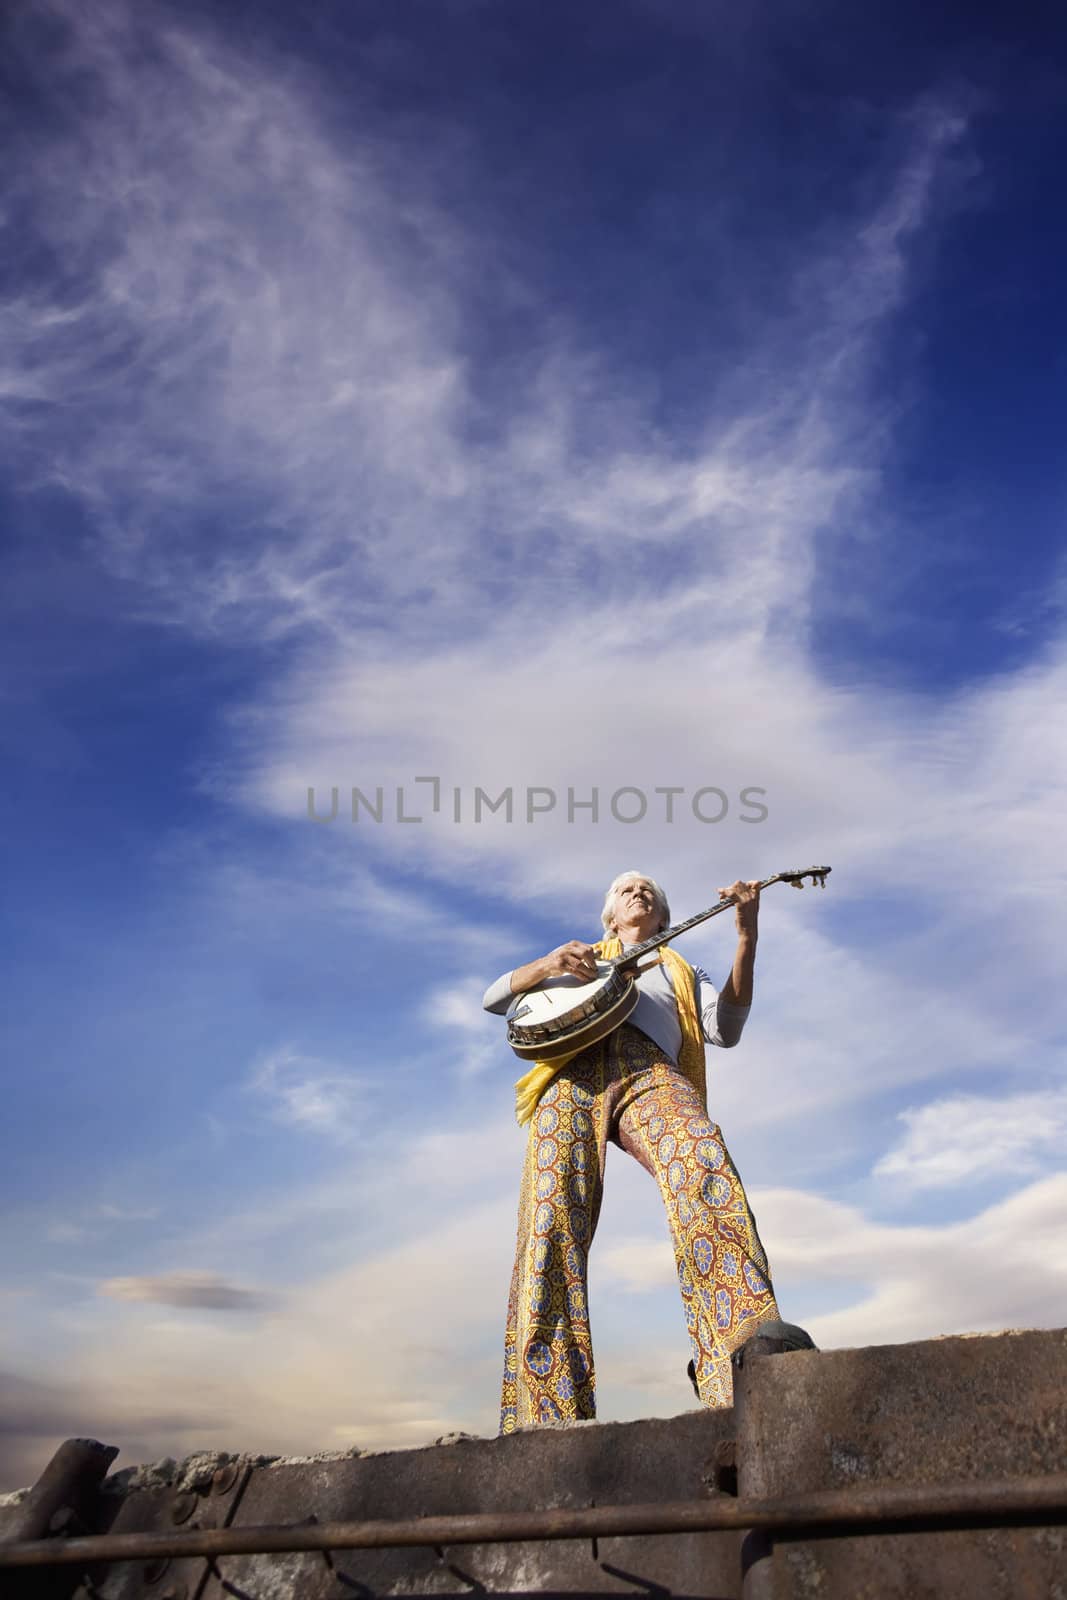 Banjo Player with groovy clothes against a wide sky